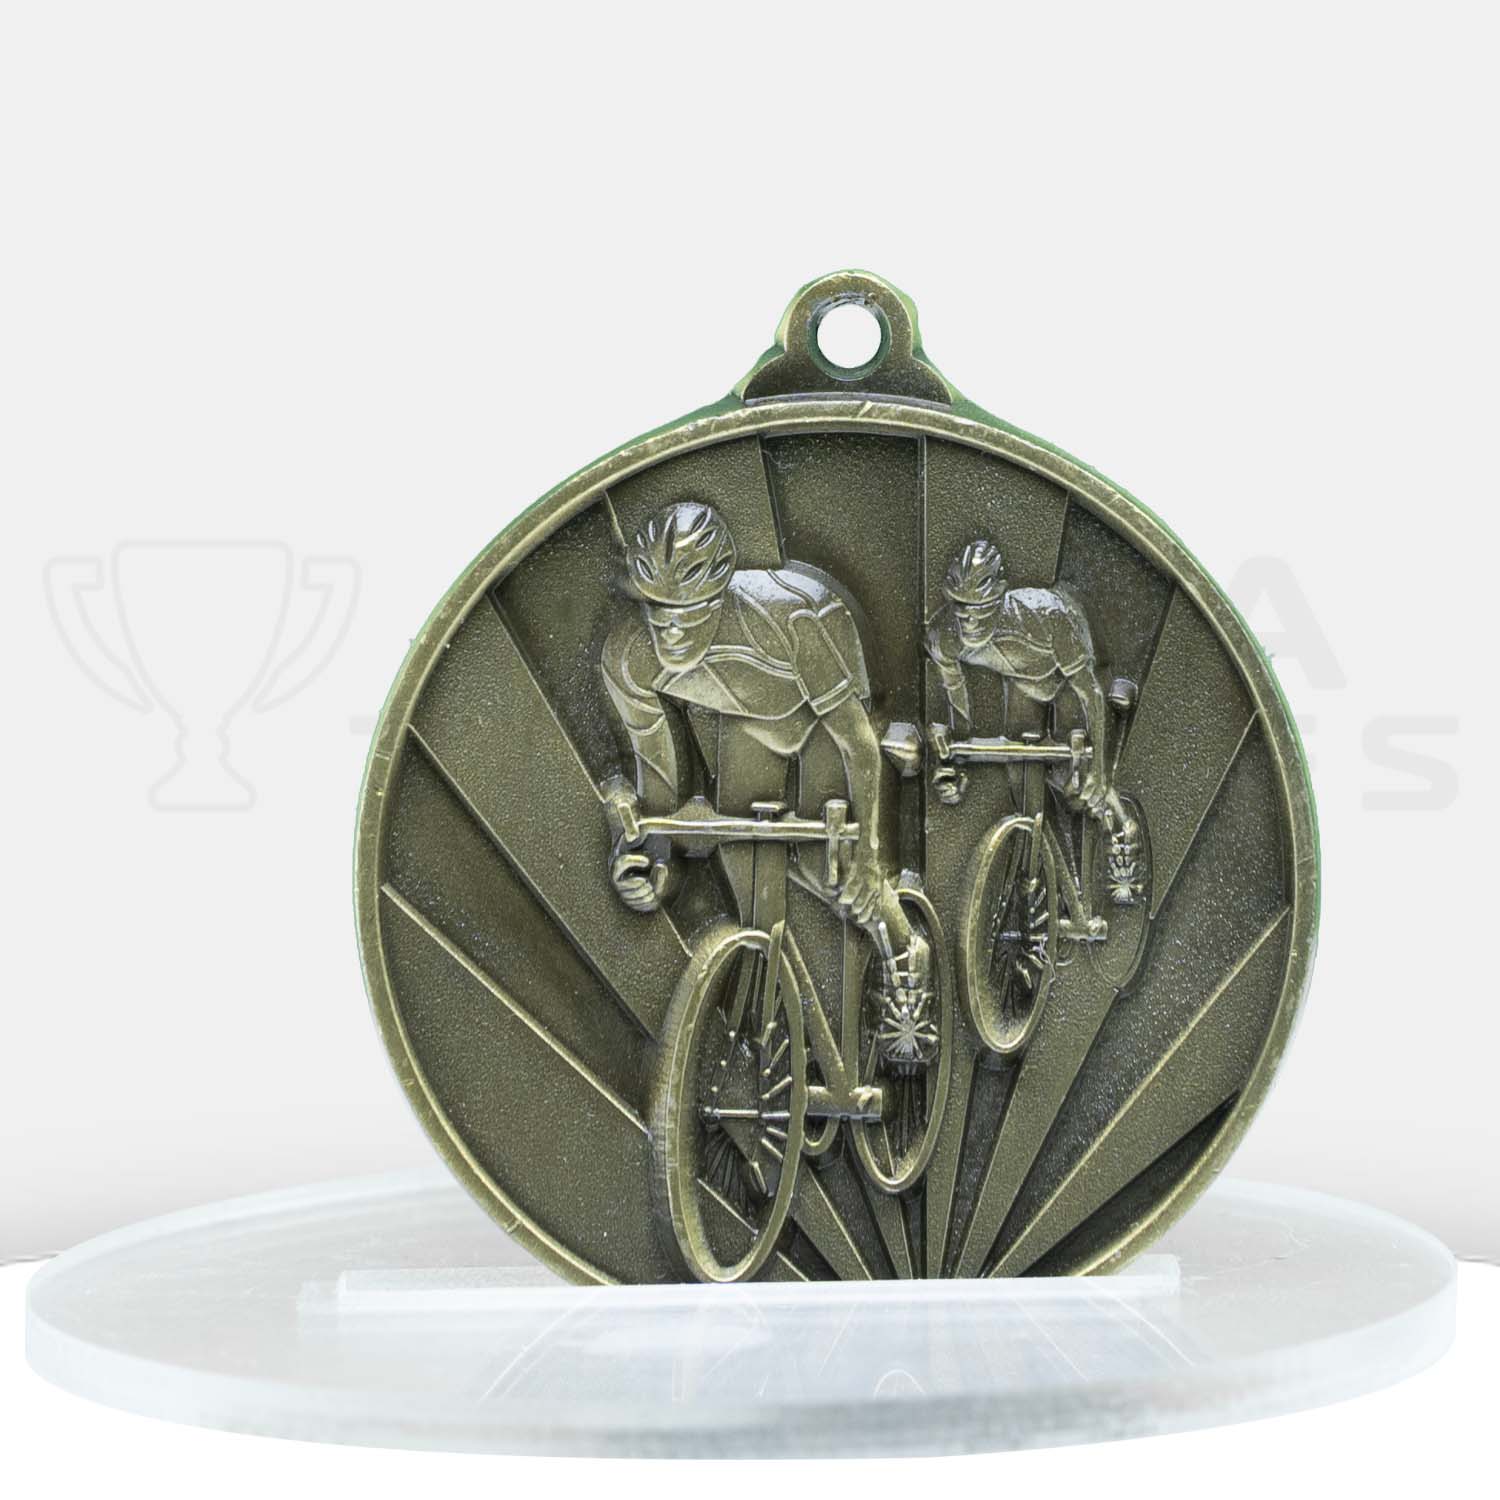 sunrise-medal-cycling-gold-1076-14g-front